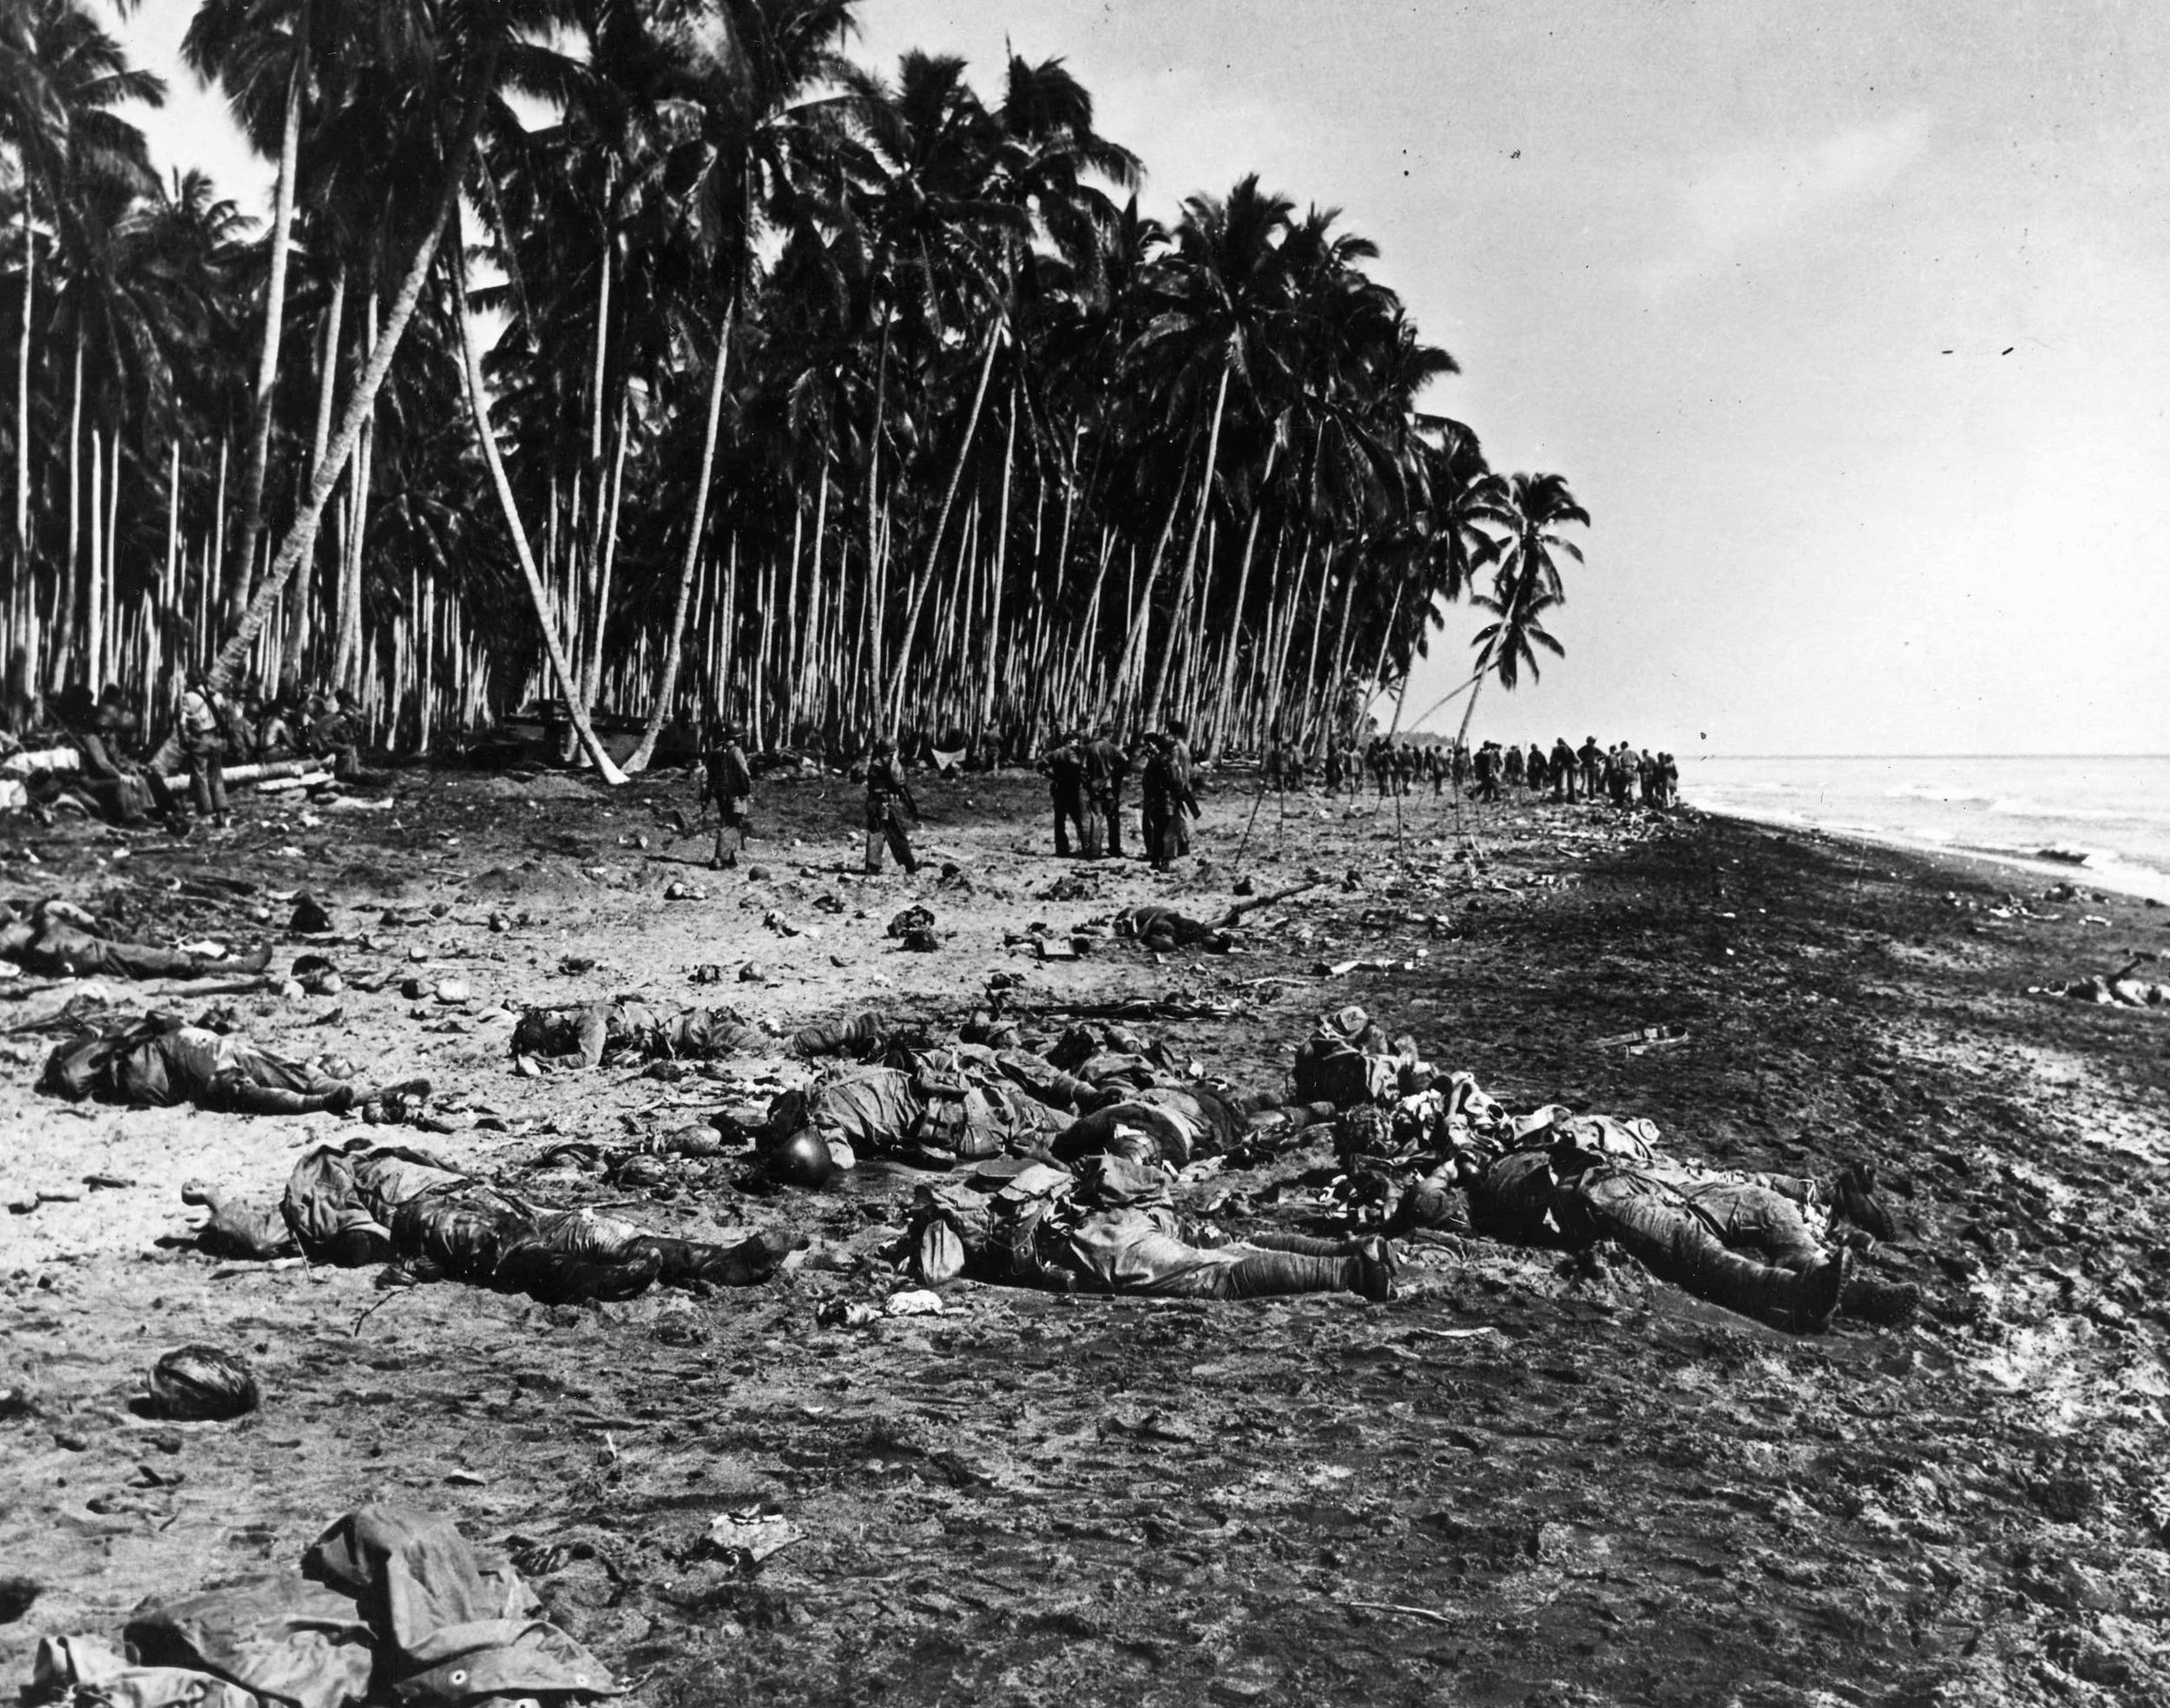 Slaughtered by U.S. Marine gunfire at the mouth of the Tenaru River the previous night, the jumbled corpses of Japanese soldiers litter the Guadalcanal beach in the morning sun. The Ichiki Detachment had provided the first concerted effort by the Japanese to drive the Americans off the island. (National Archives)